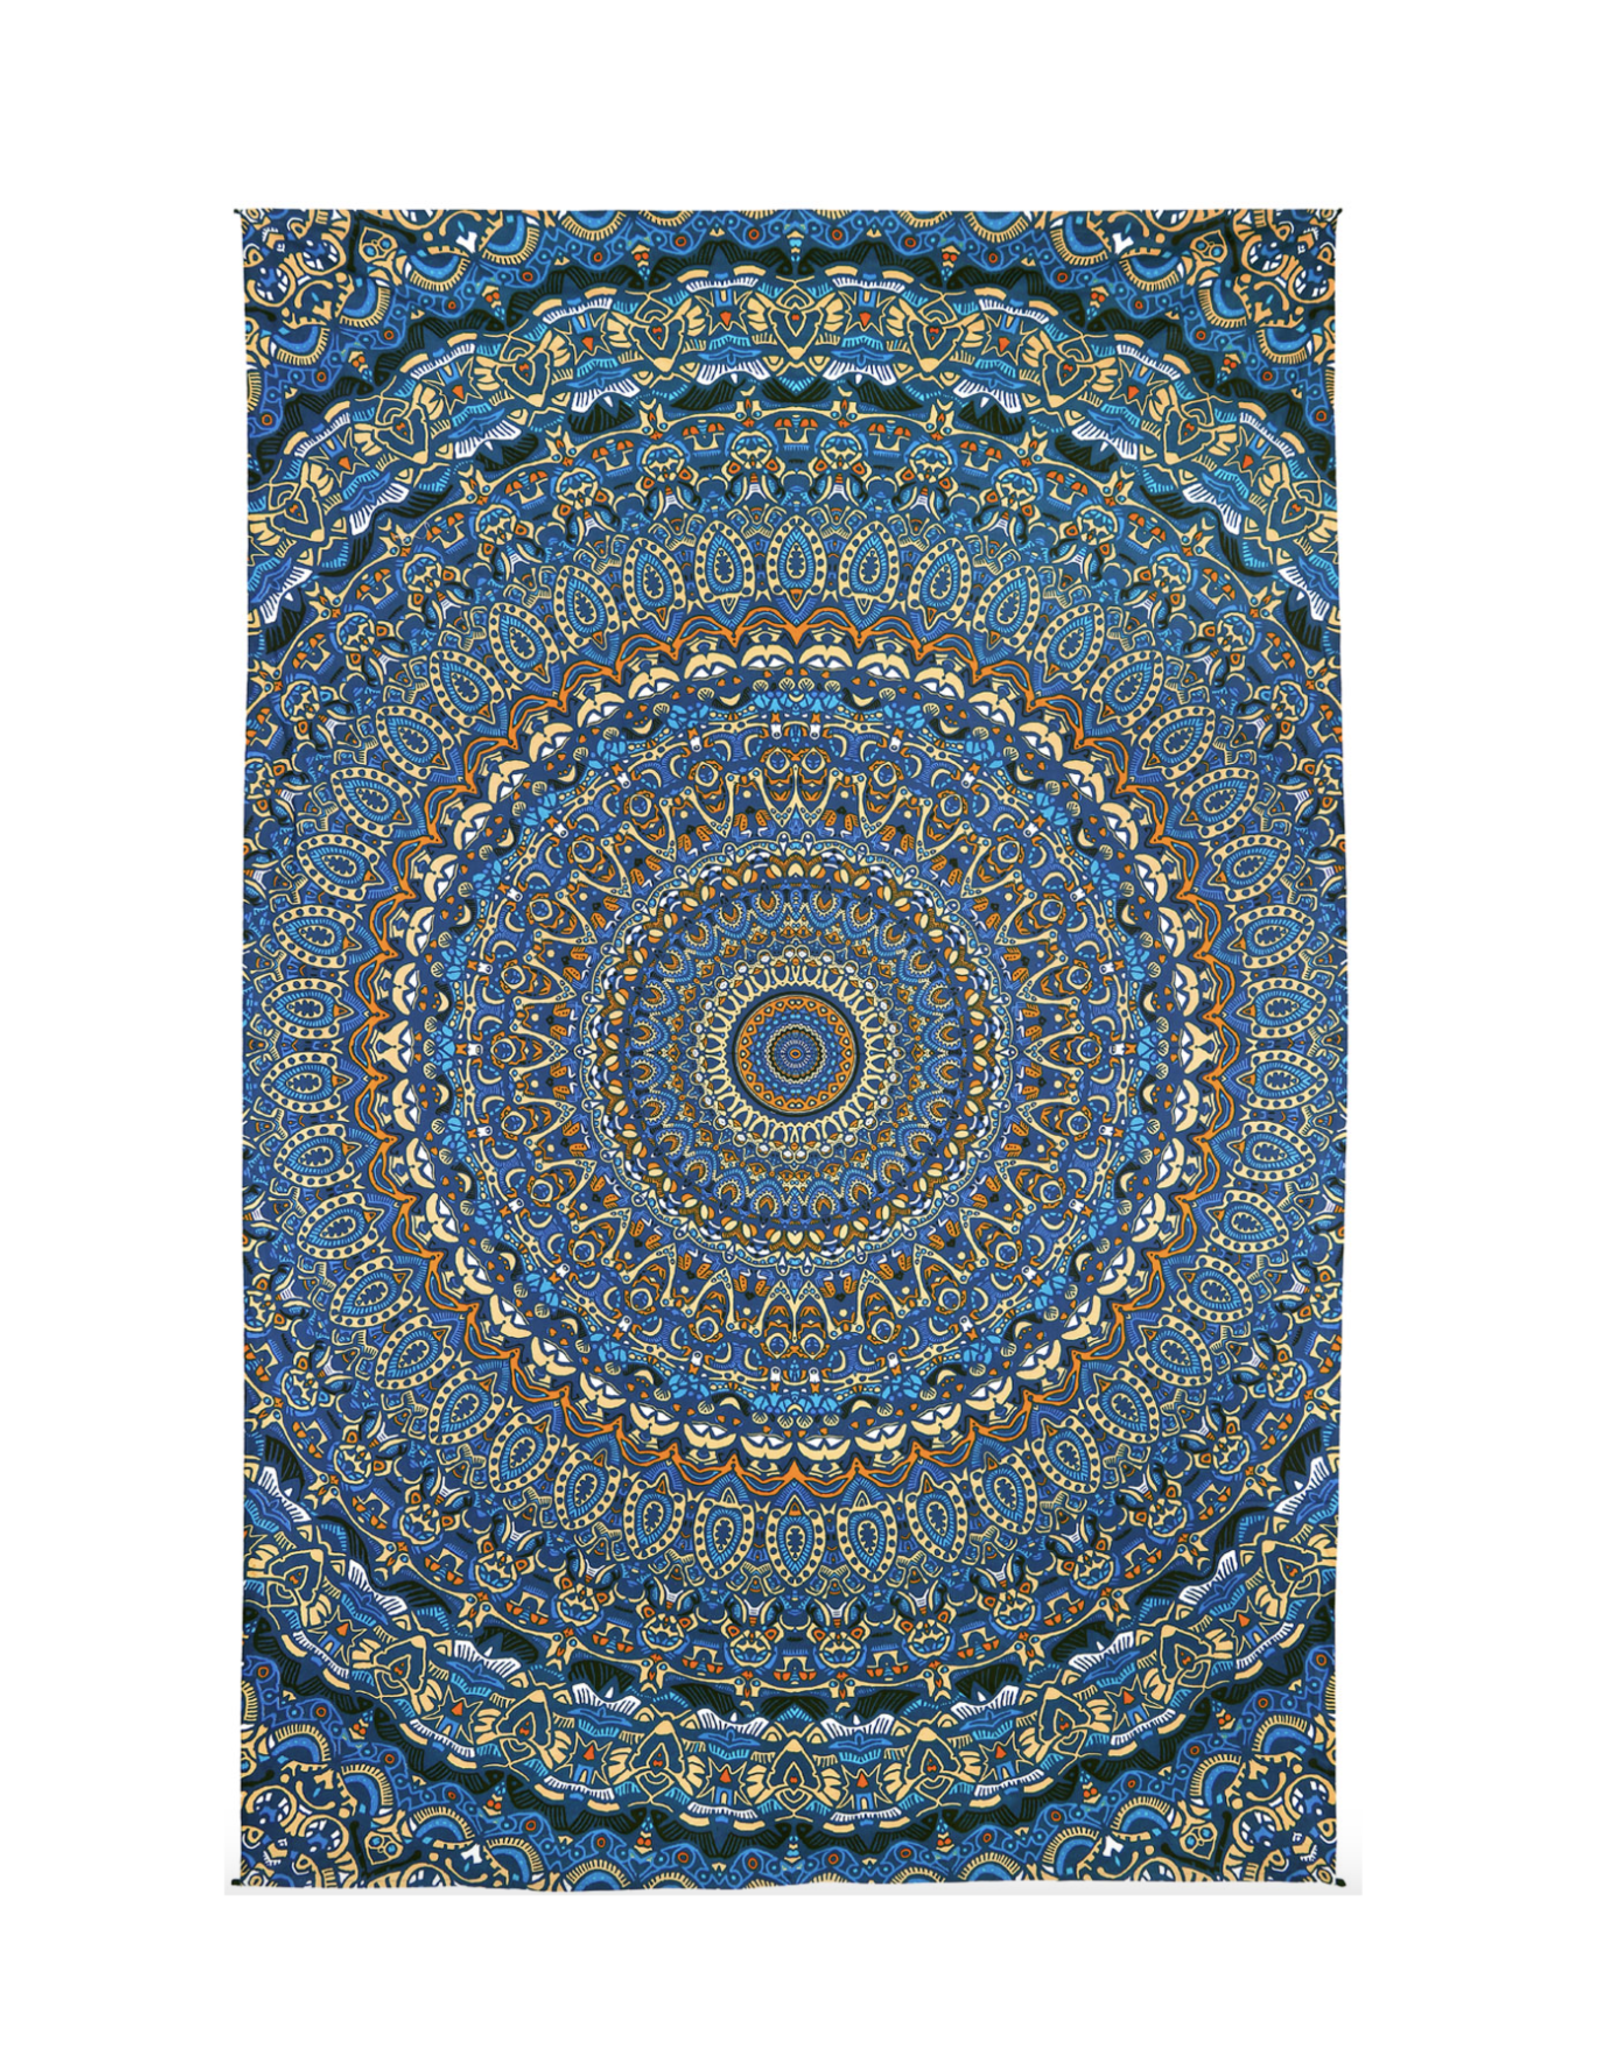 Harmony In Color Tapestry 60"x90" - Art by Chris Pinkerton